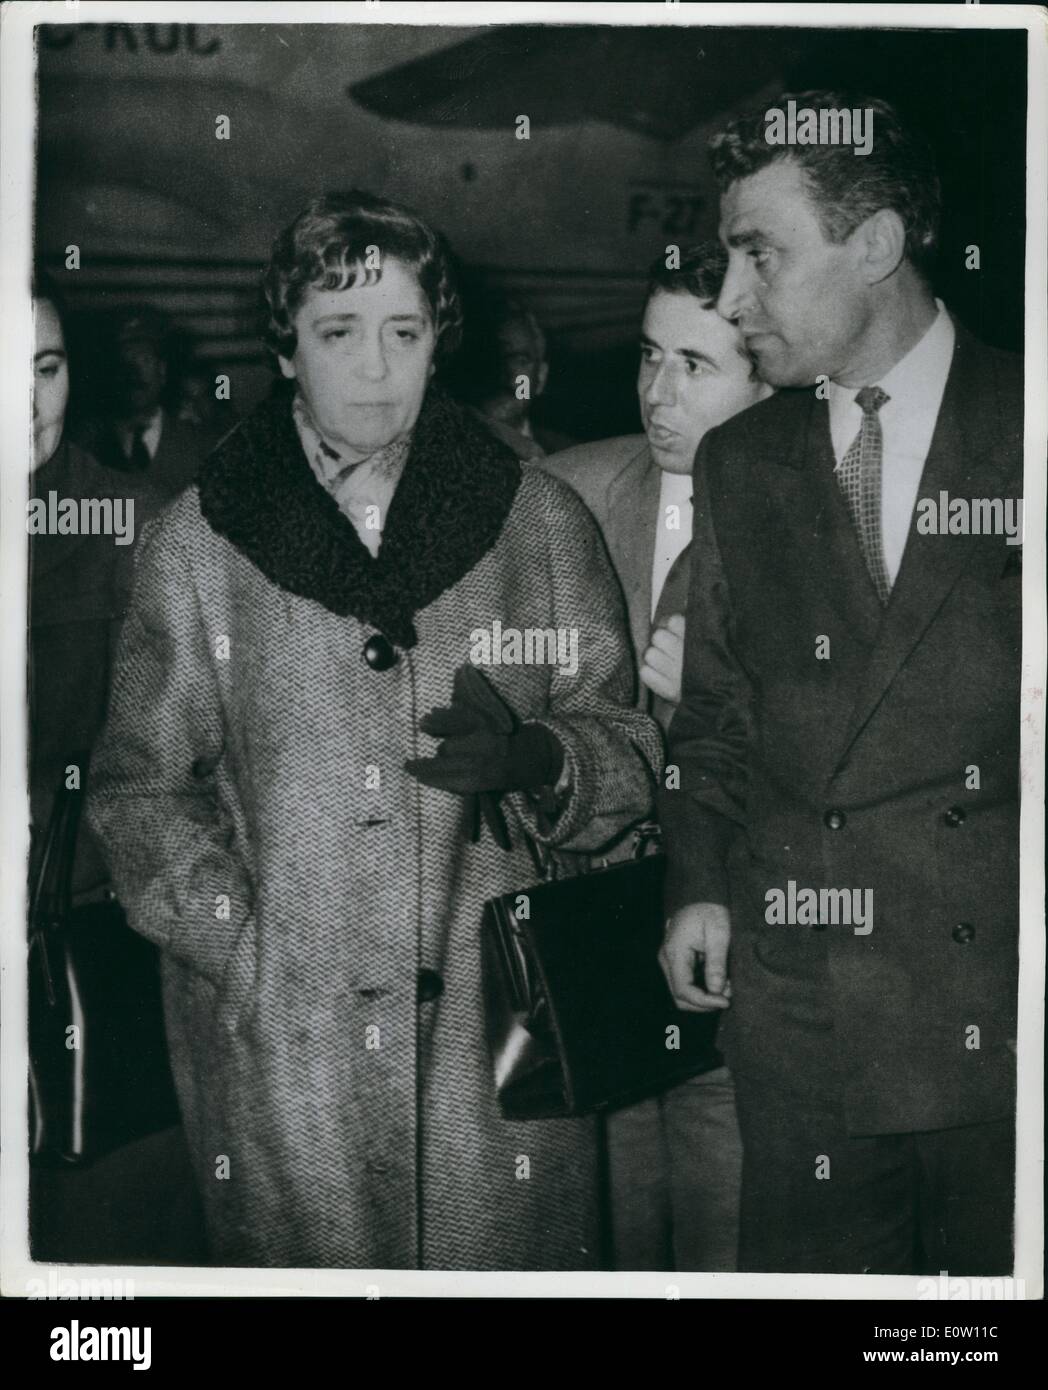 Nov. 11, 1960 - Mrs. menderes visits husband former prime minister of turkey on prison island: Mrs. Berlin menderes - wife of former prime minister of Turkey Adnan menderes recently paid a visit to her husband - now in prison with other members of his regime whole undergoing trial on numerous charges. Mr. Menderes is on the Island of yassiada Mr, menderes has been cleared of one of the charges against him - but has many others to still face. Photo shows Mrs, Berlin menderes after visiting her husband at the Island of Yassiada. Stock Photo